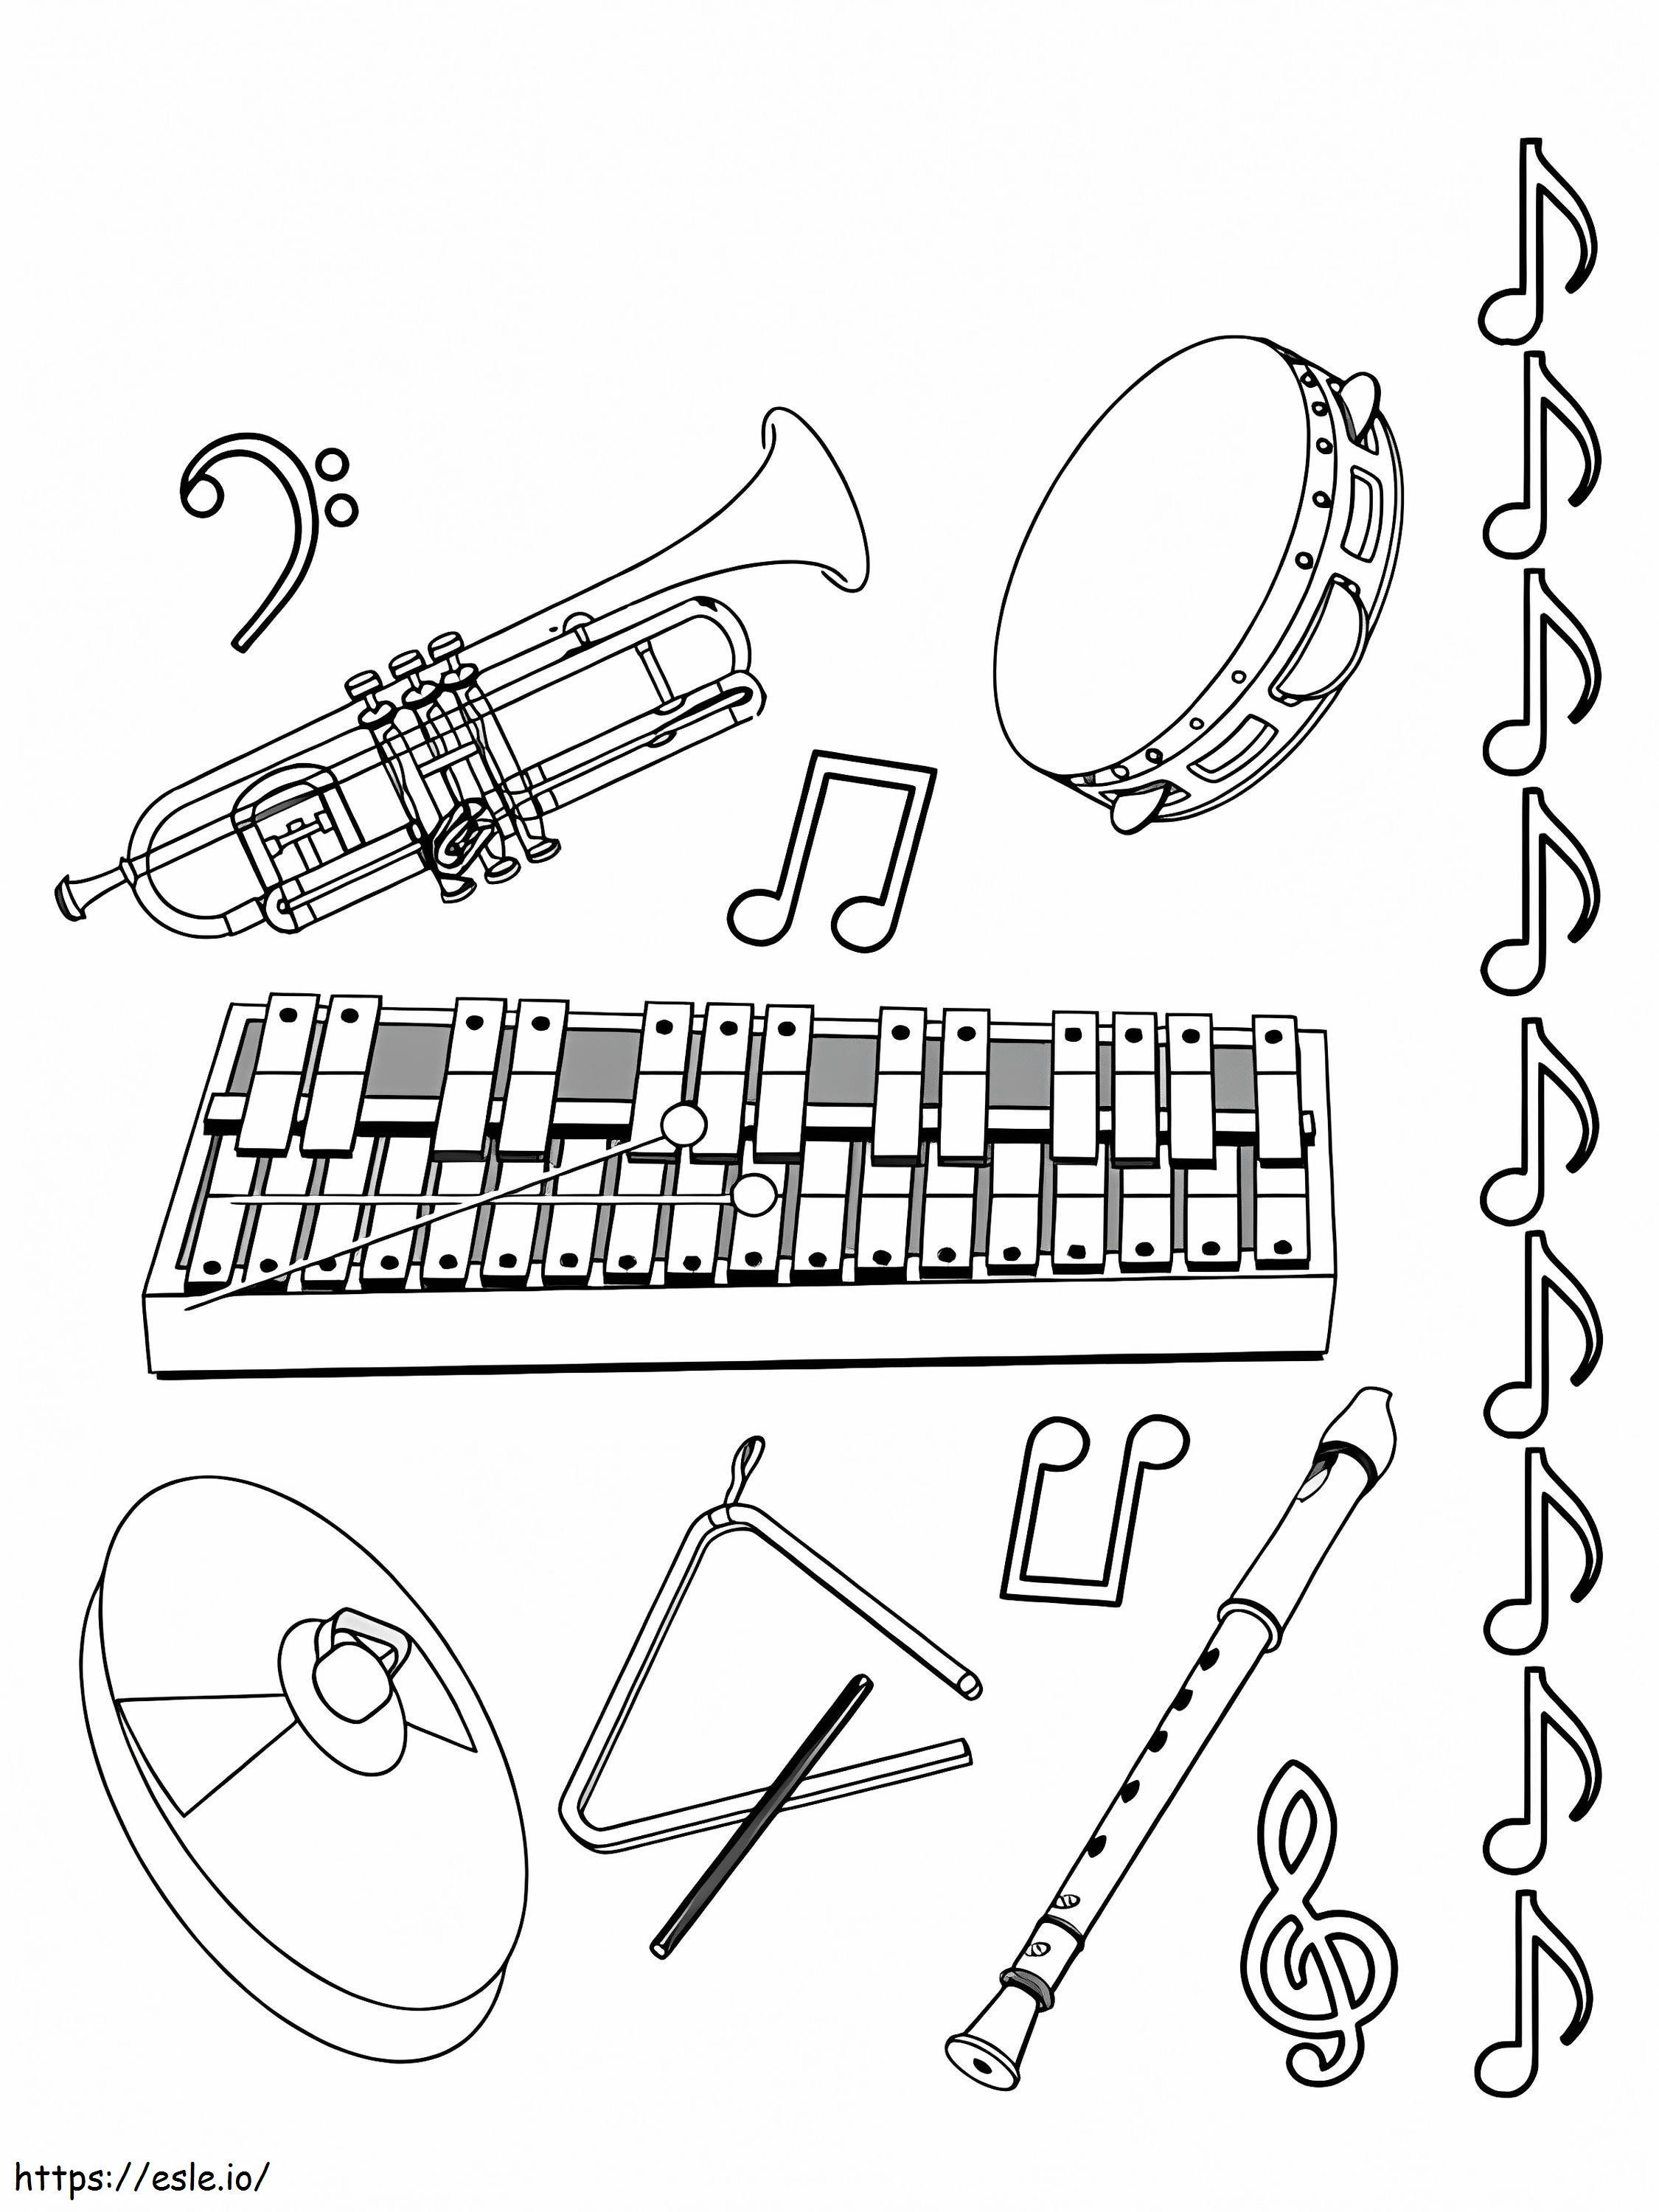 Normal Music Instrument coloring page